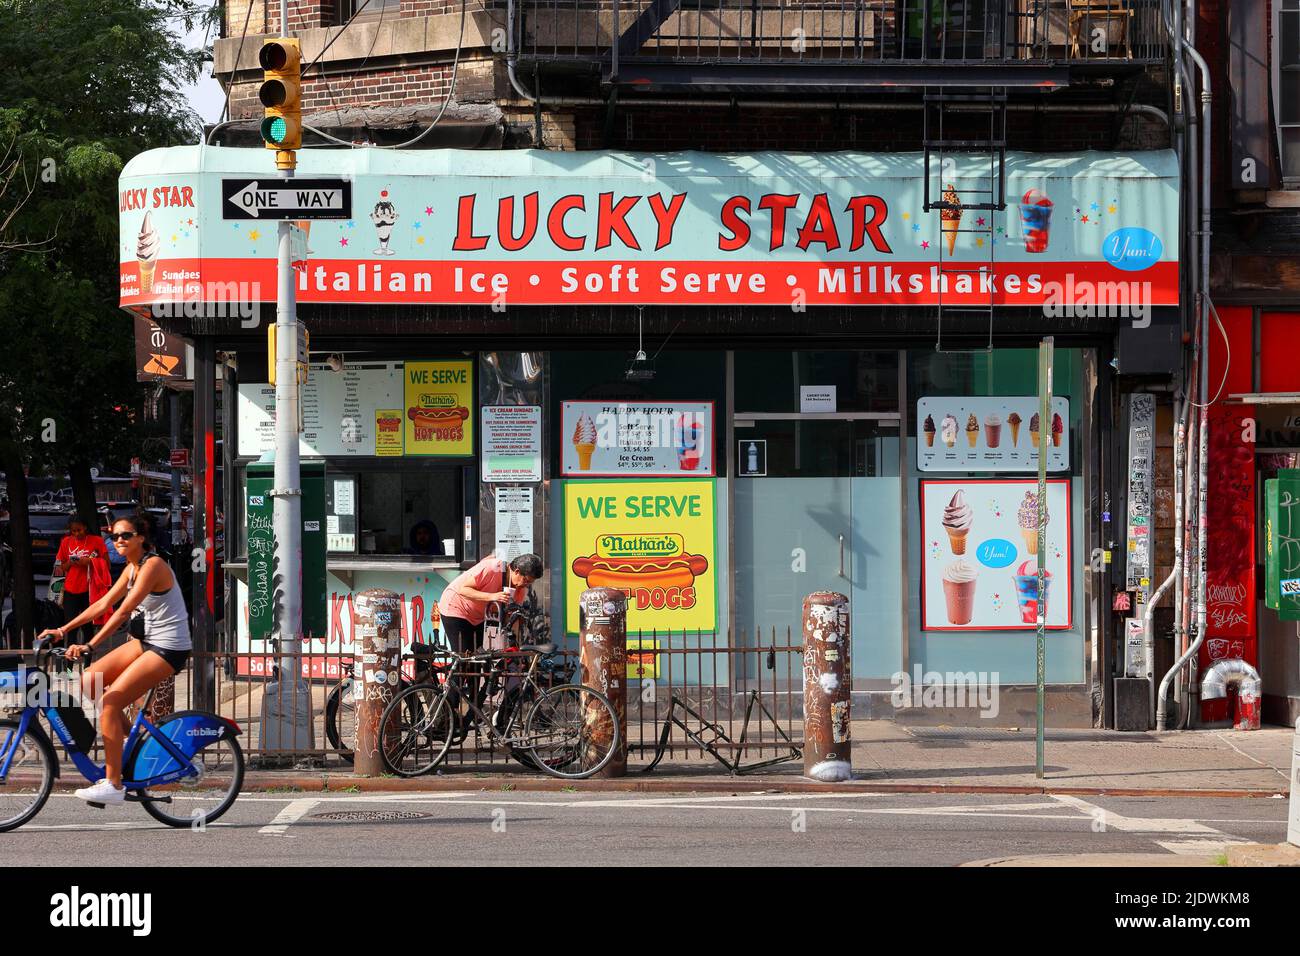 Lucky Star, 166 Delancey St, New York, NY. exterior storefront of an ice cream shop in the Lower East Side neighborhood in Manhattan. Stock Photo